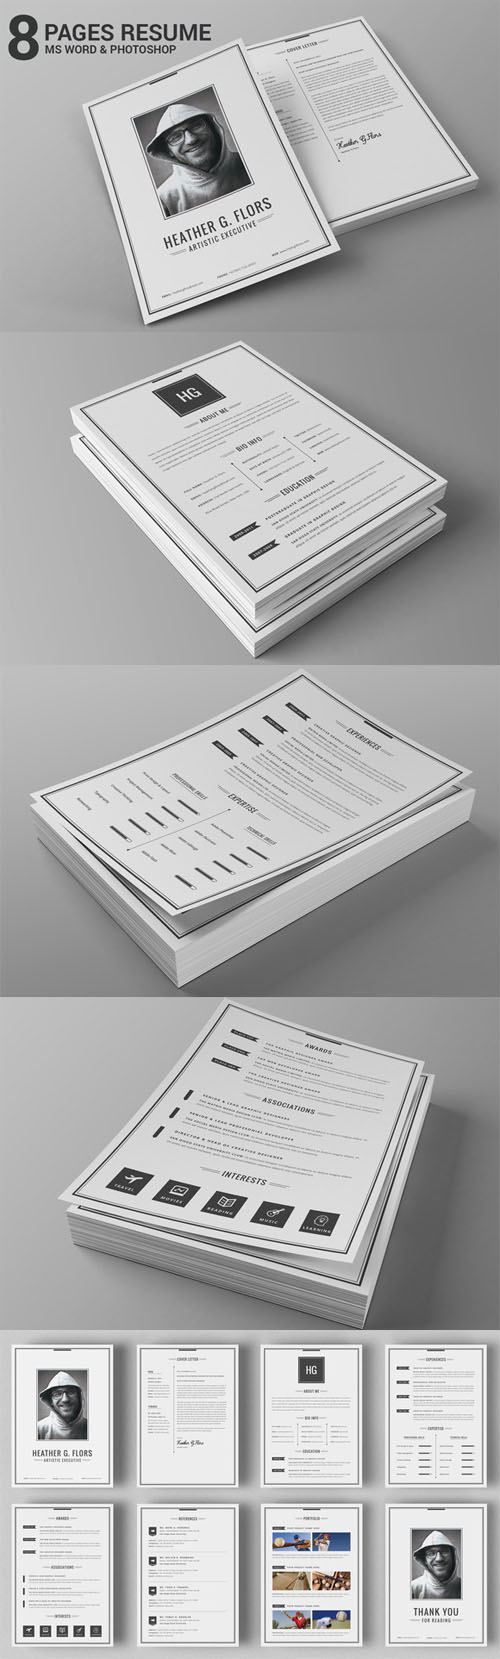 Creativemarket - 8 Pages Extended Resume CV MS Word - 170291